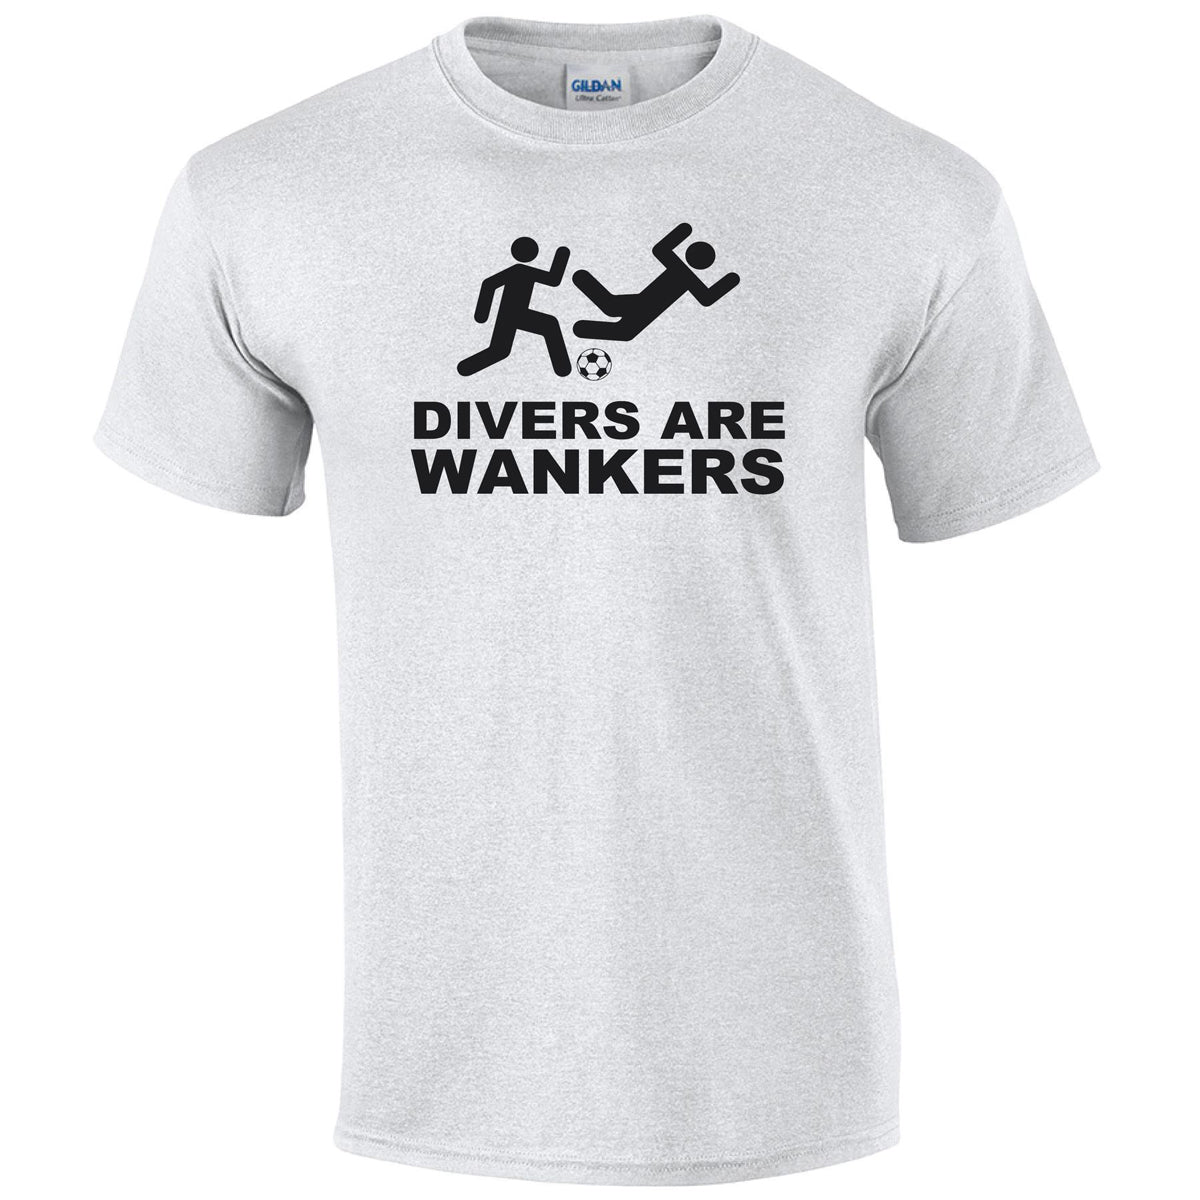 Divers Are Wankers Soccer T-Shirt T-shirts 411 Youth Medium Ash Youth